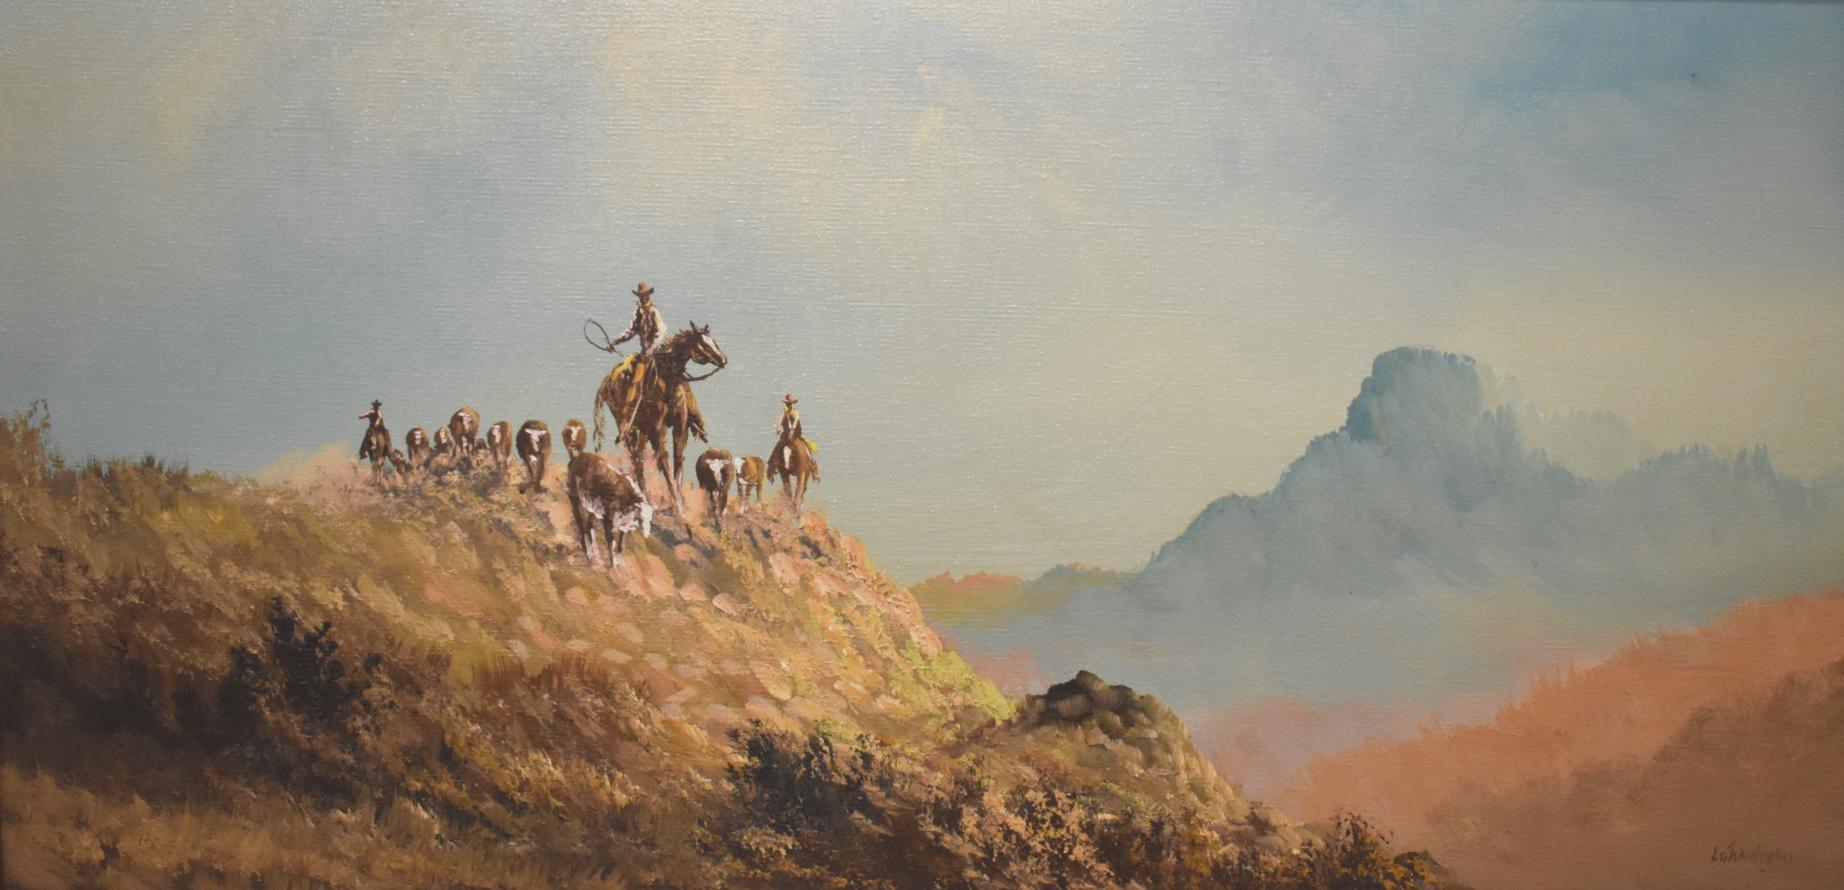 Lester Huges Landscape Painting - "MOVE ALONG" CATTLE IN WEST TEXAS.   WESTERN COWBOY, COWS, HORSES, MOUNTAINS